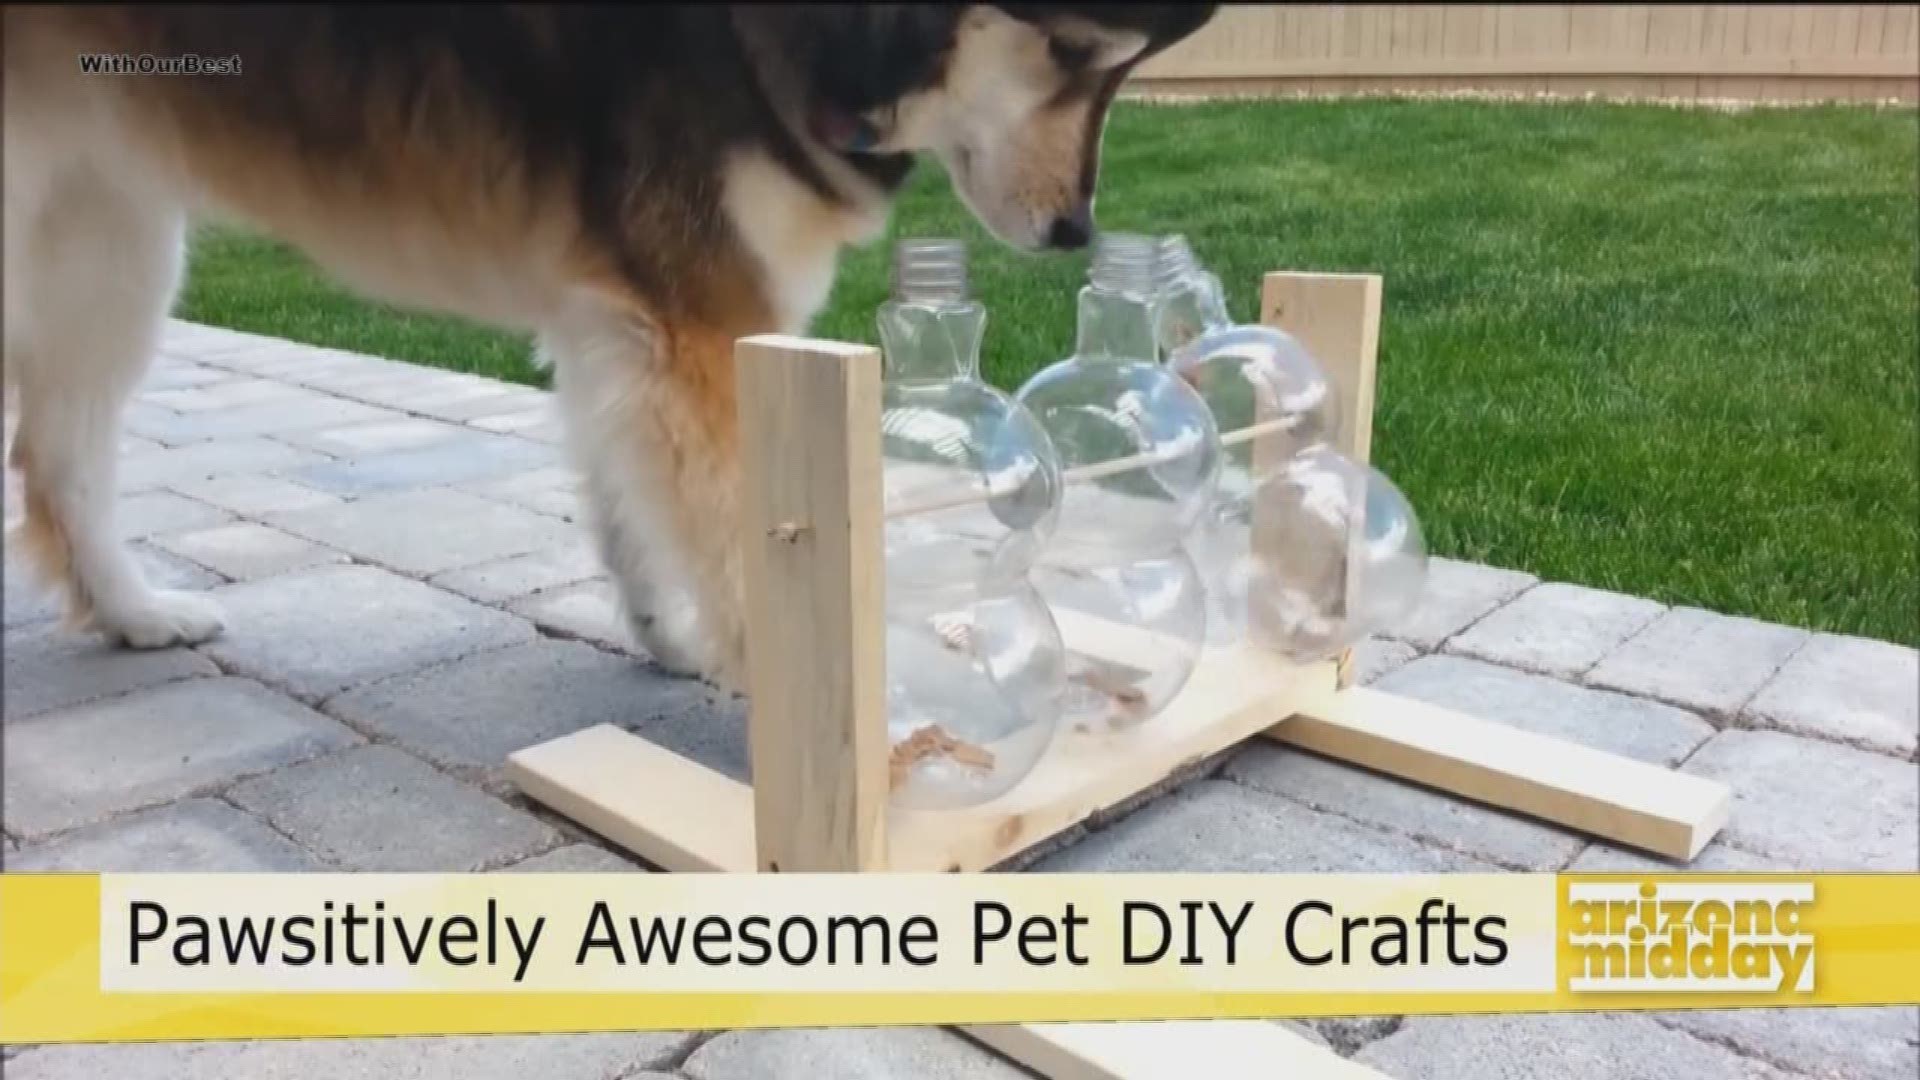 Treat your pet to some fun with these homemade toys purrfect for your furry pals.